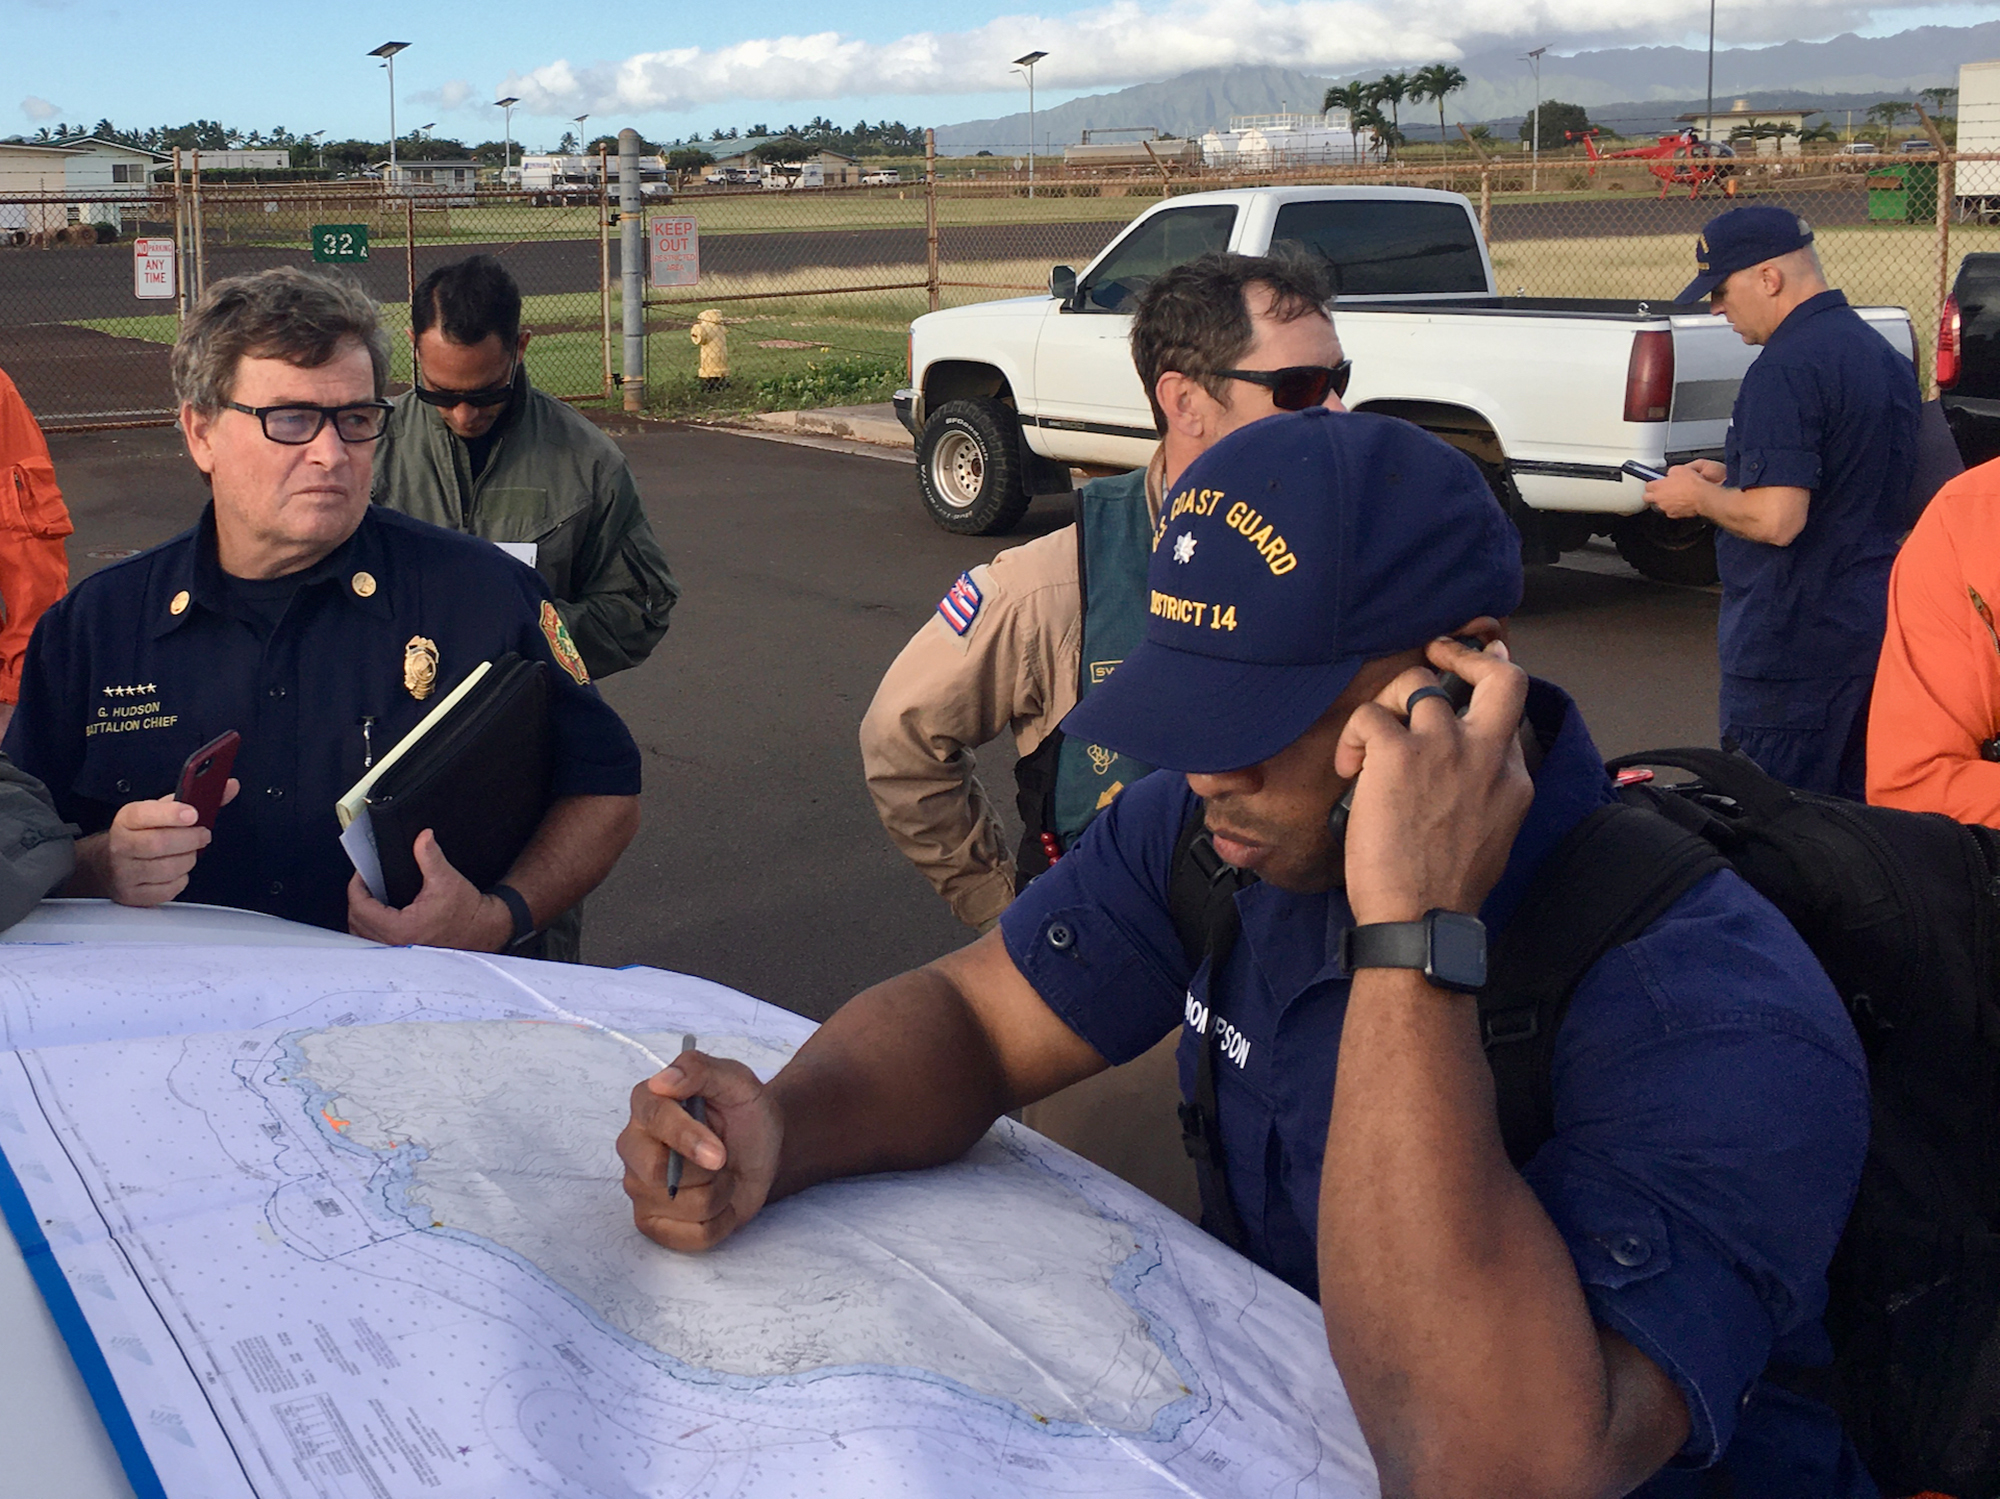 In this photo released by the U.S. Coast Guard, Coast Guard Incident Command Post responders look over a map of the Na Pali Coast State Wilderness Park on the Hawaiian island of Kauai on Friday, Dec. 27, 2019, the day after a tour helicopter disappeared with seven people aboard. Authorities say wreckage of the helicopter has been found in a mountainous area on the island. (Senior Chief Justin Shackleford/U.S. Coast Guard via AP)